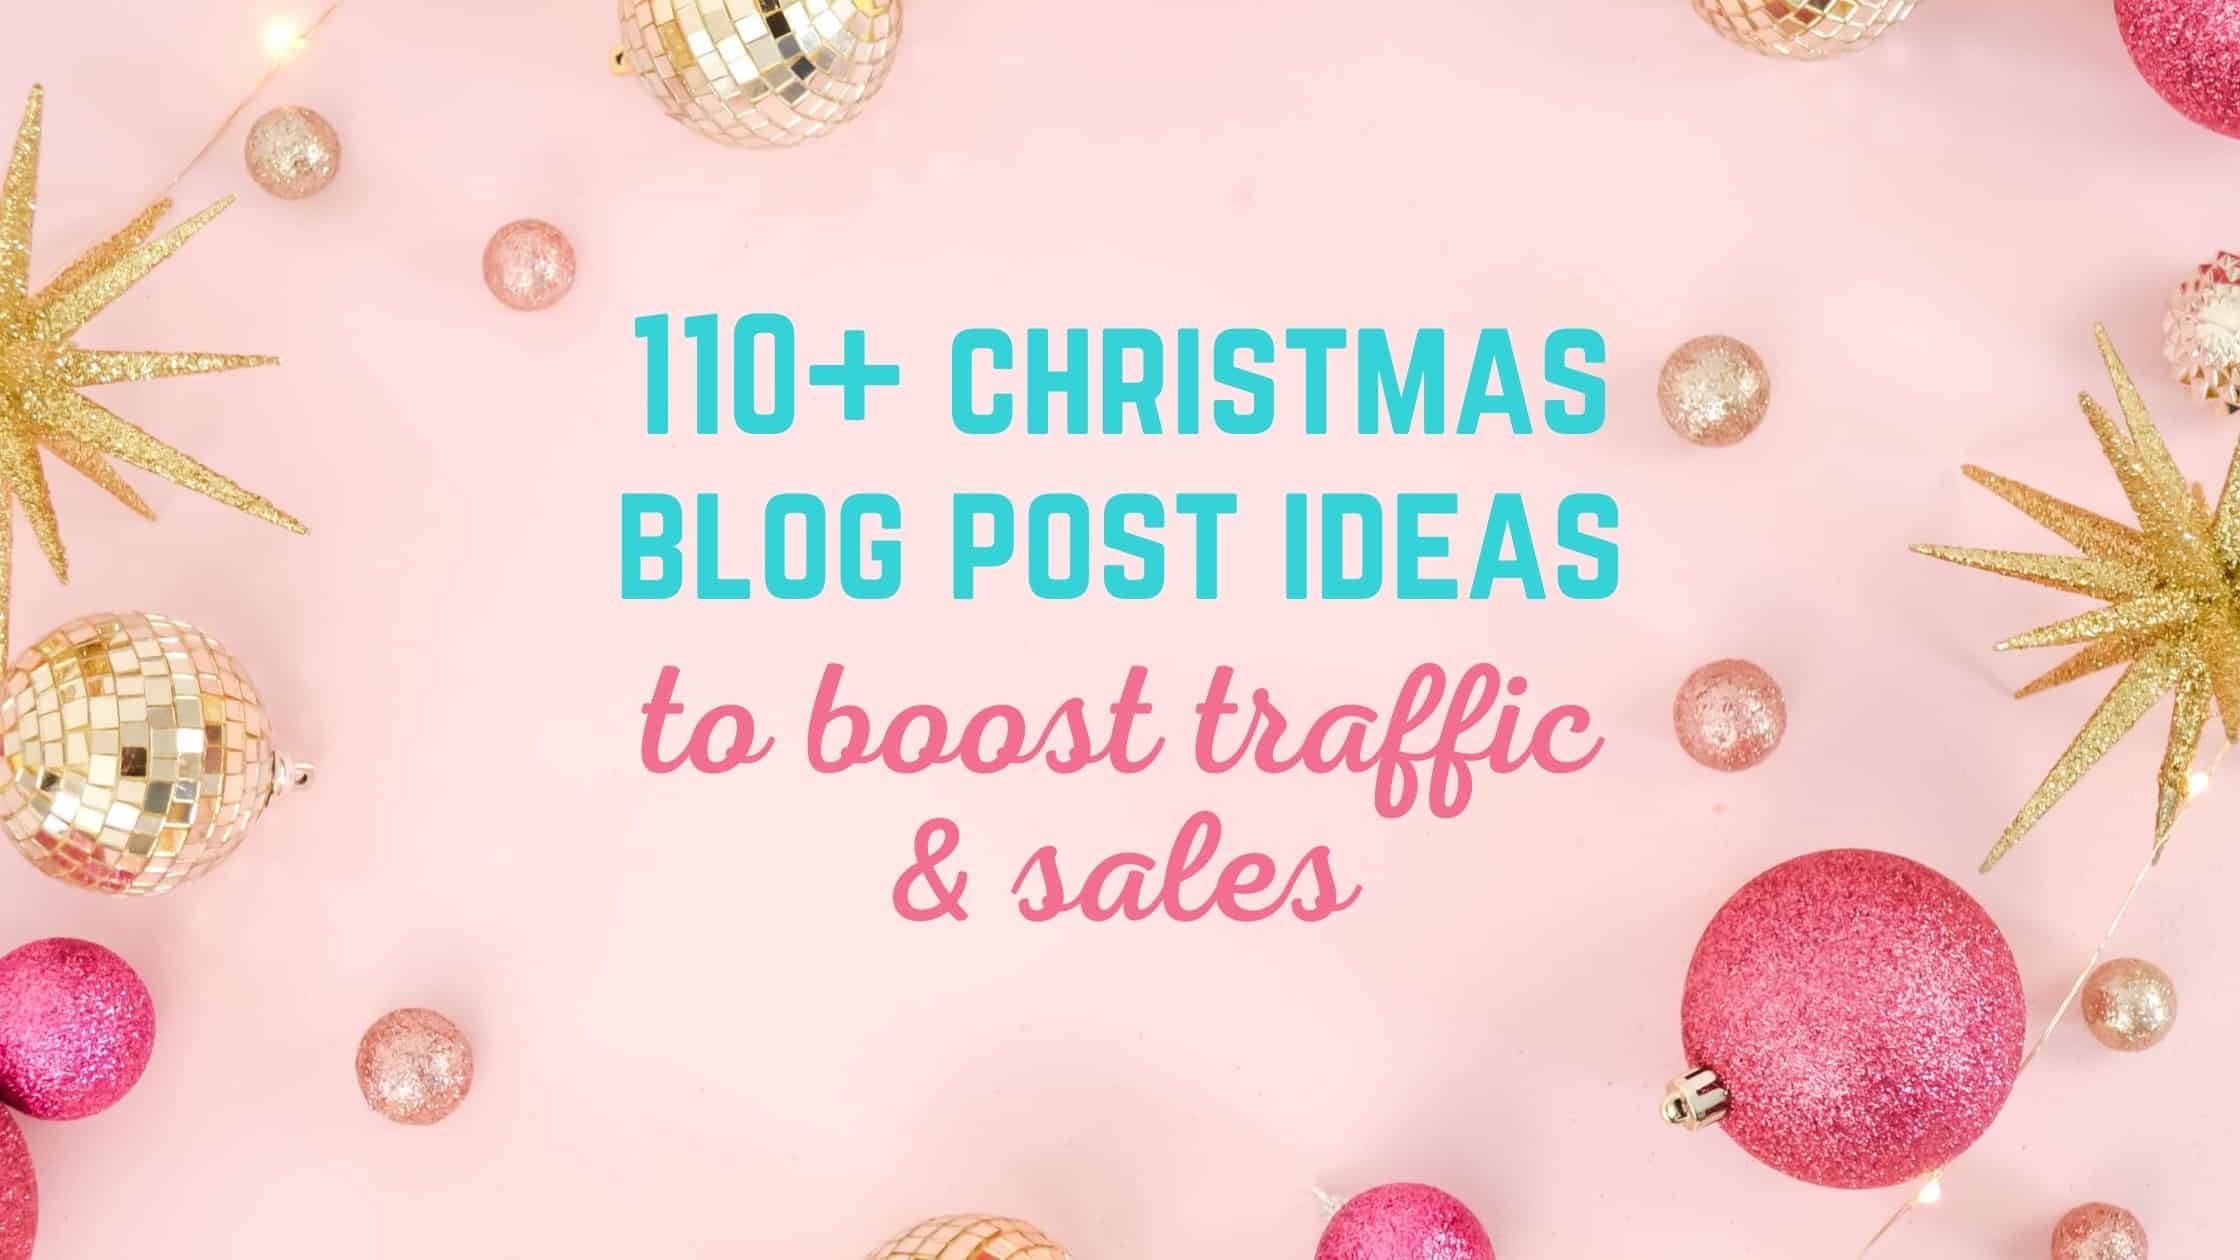 110+ Christmas Blog Post Ideas to Boost Traffic & Sales